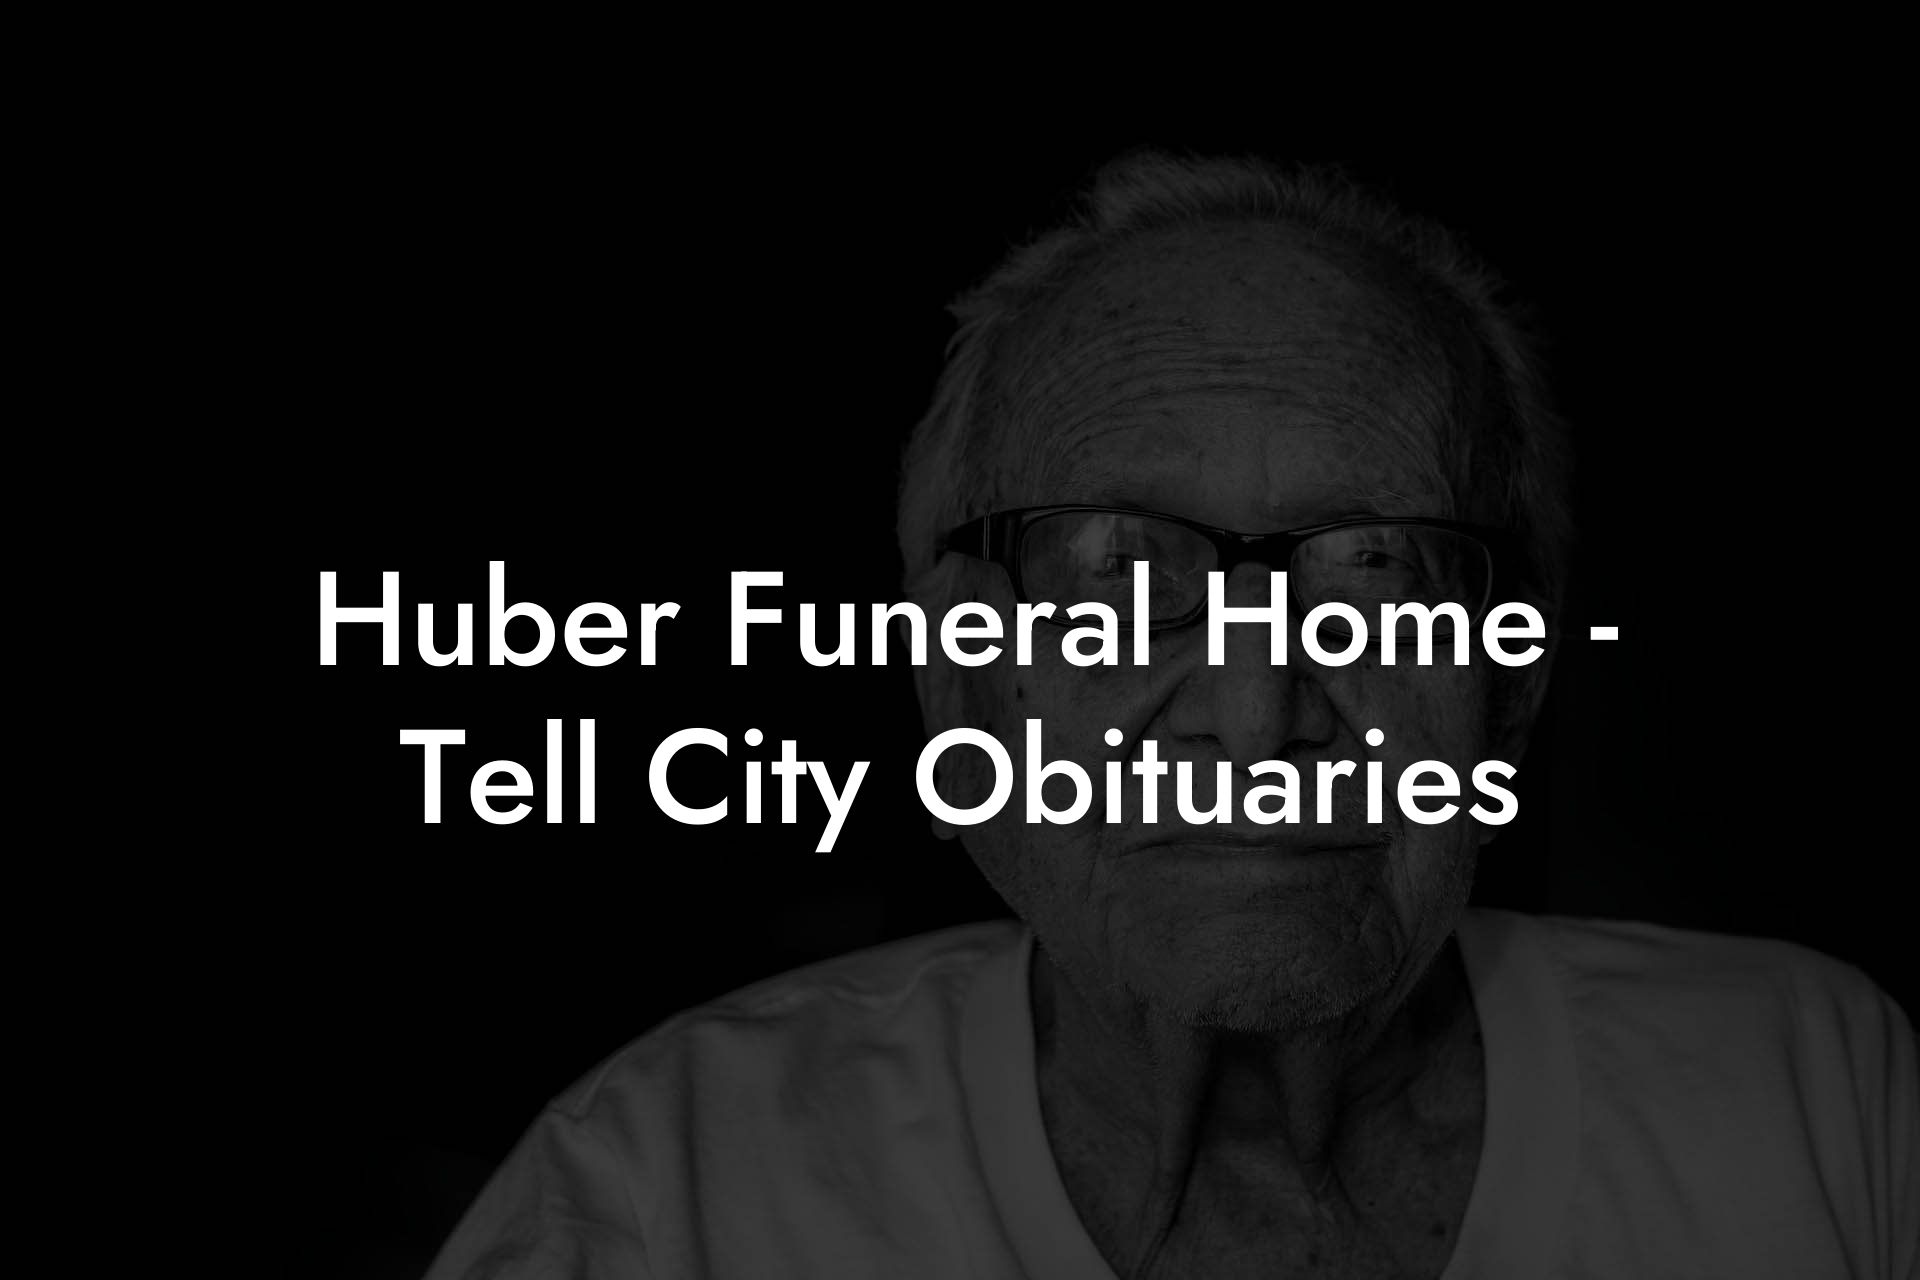 Huber Funeral Home - Tell City Obituaries